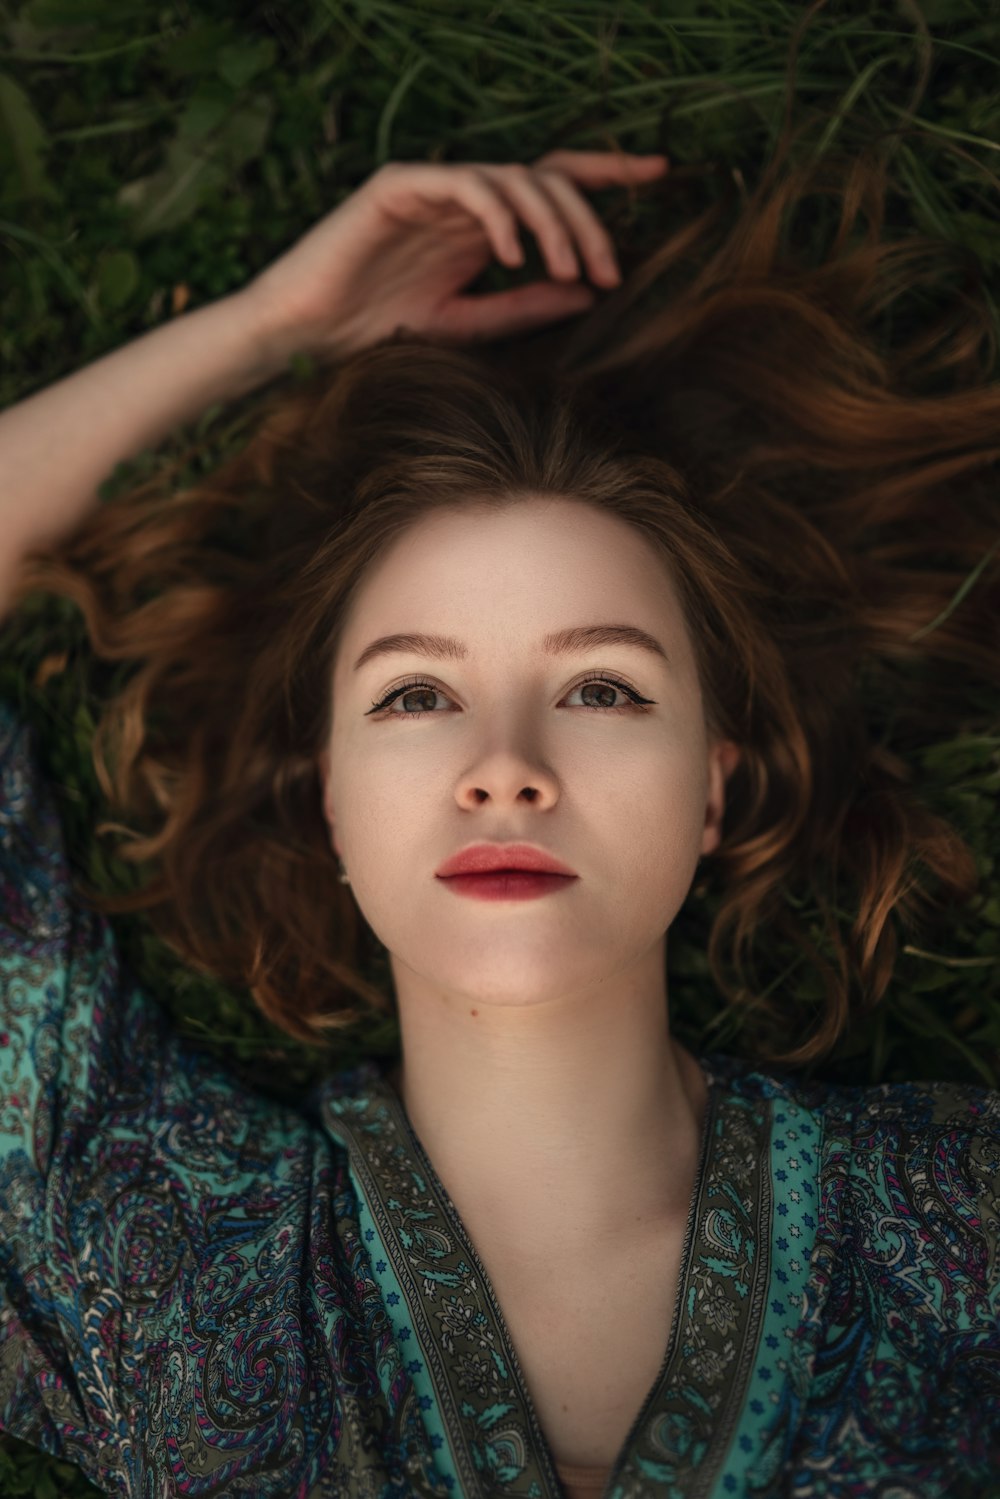 a woman laying in the grass with her hair blowing in the wind